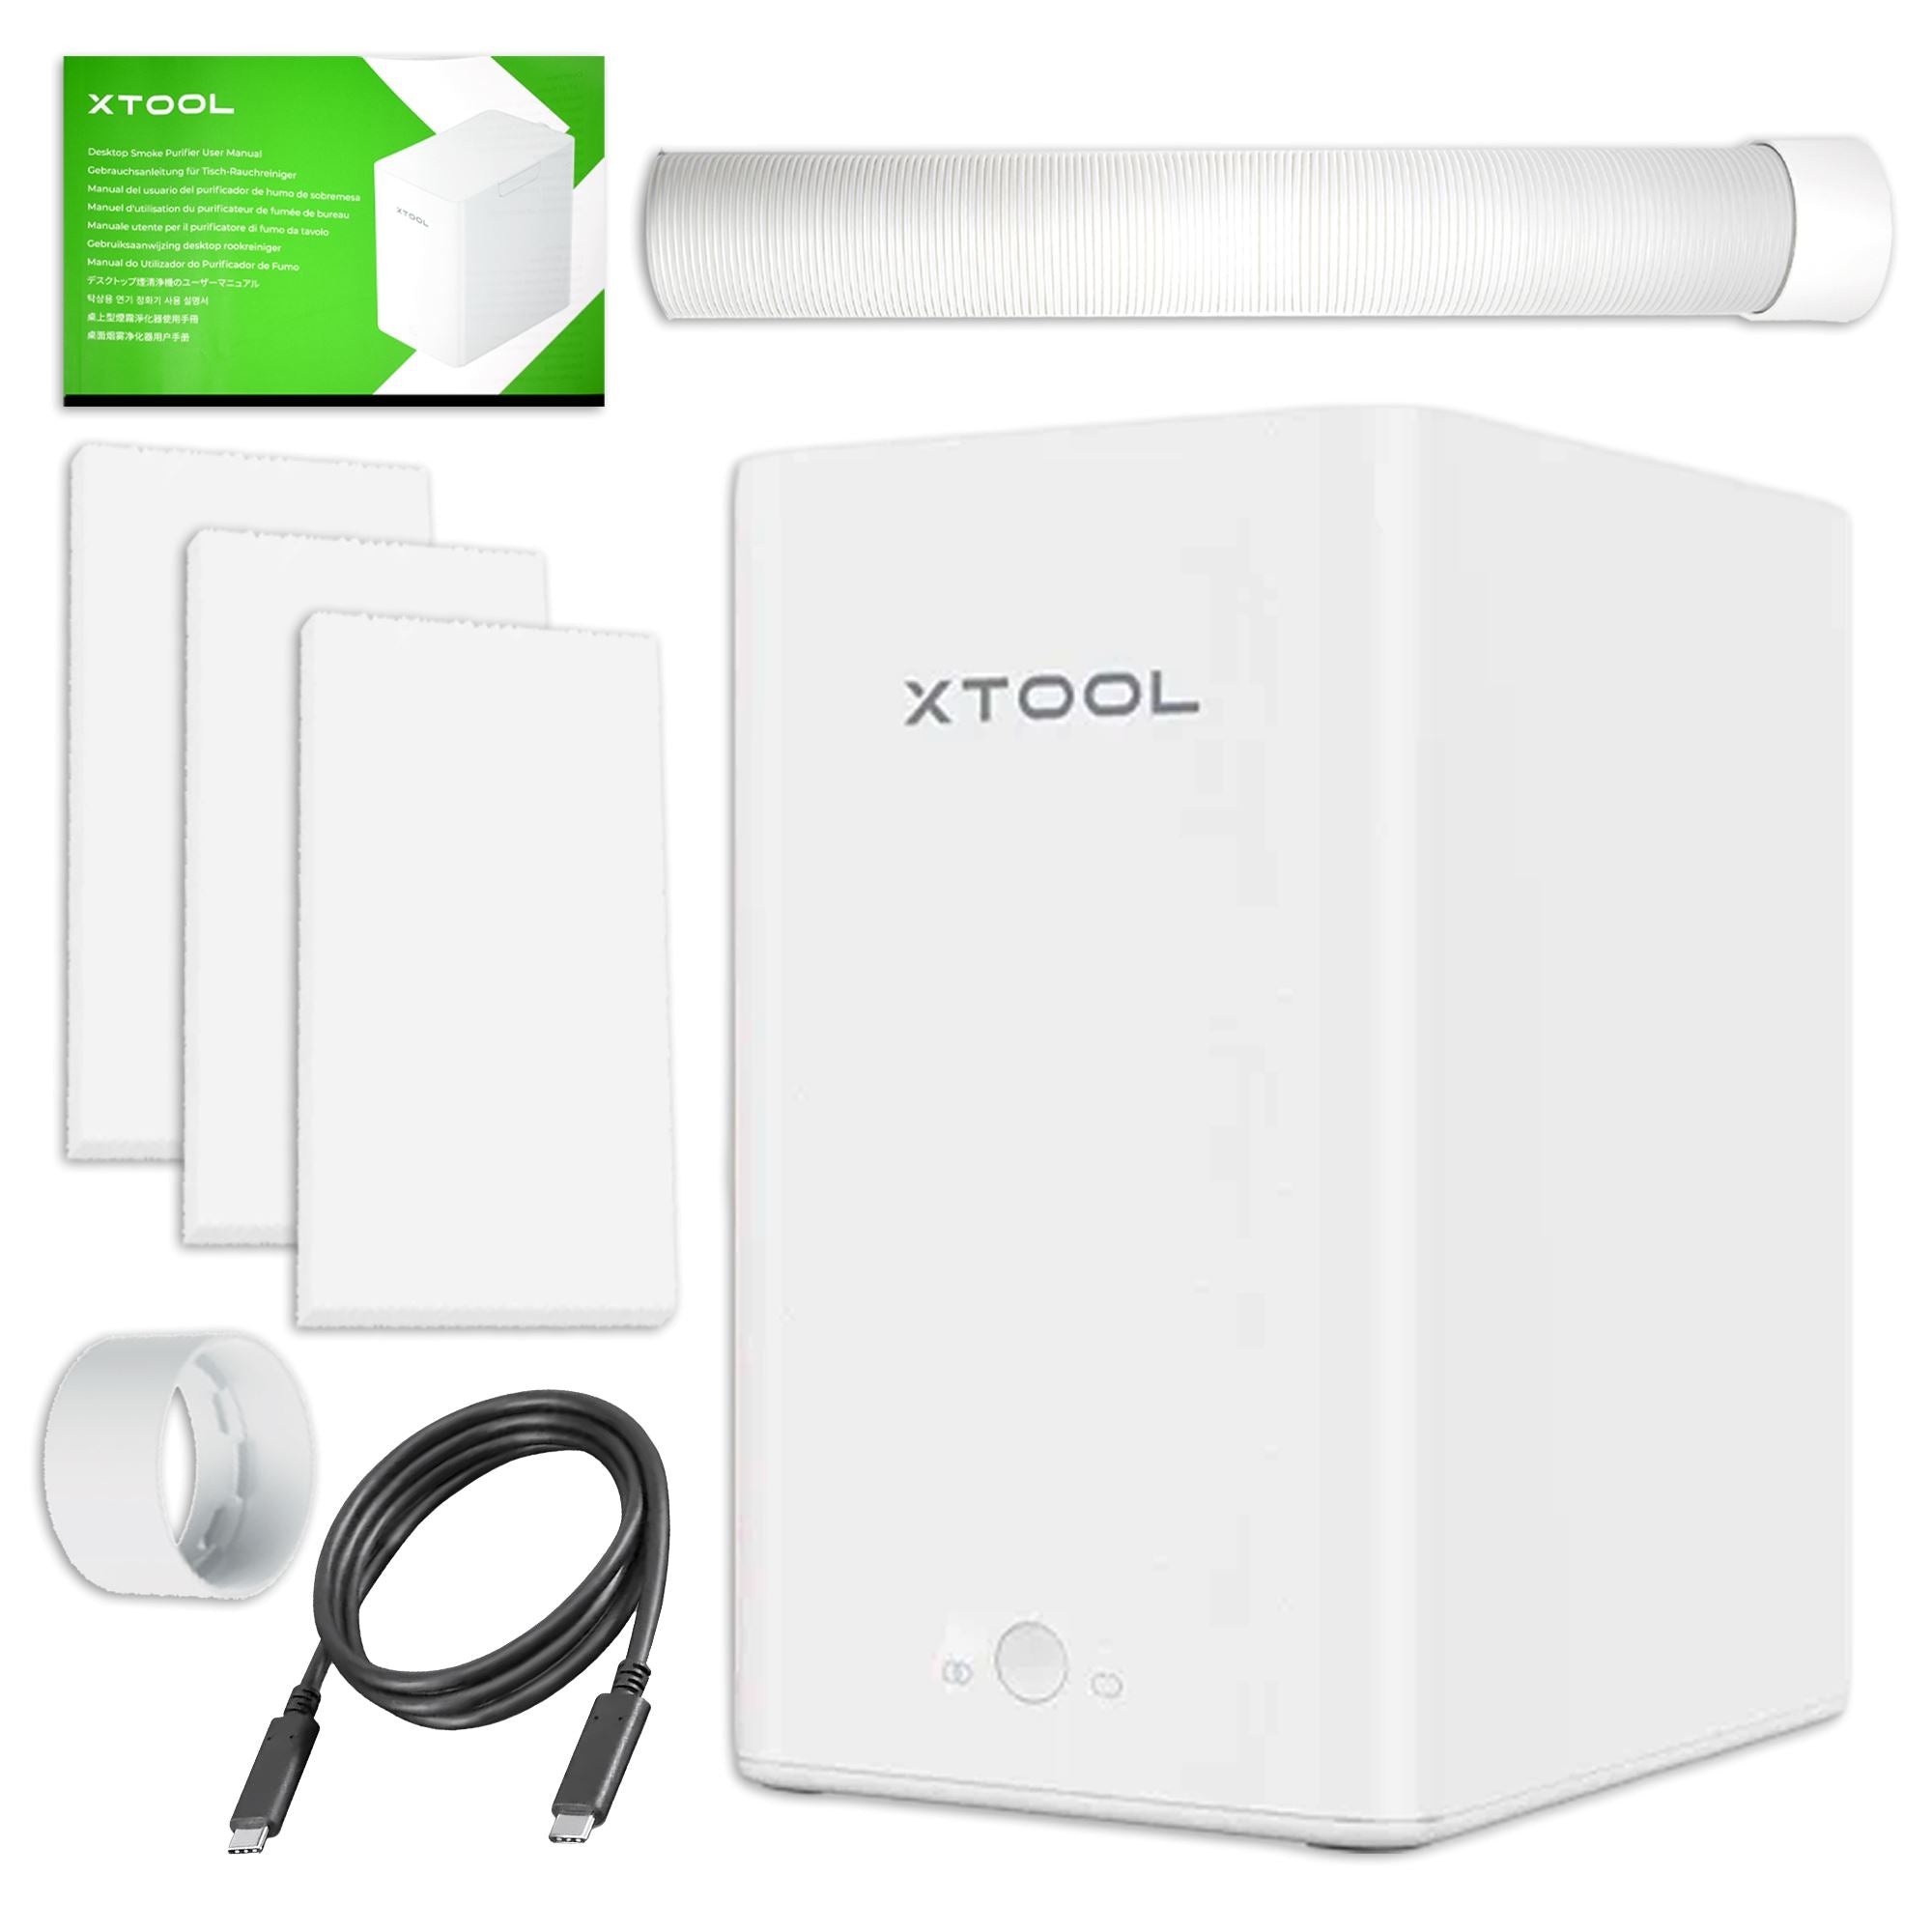 xTool Smoke/Air Purifier For F1 Portable Laser & Engraver